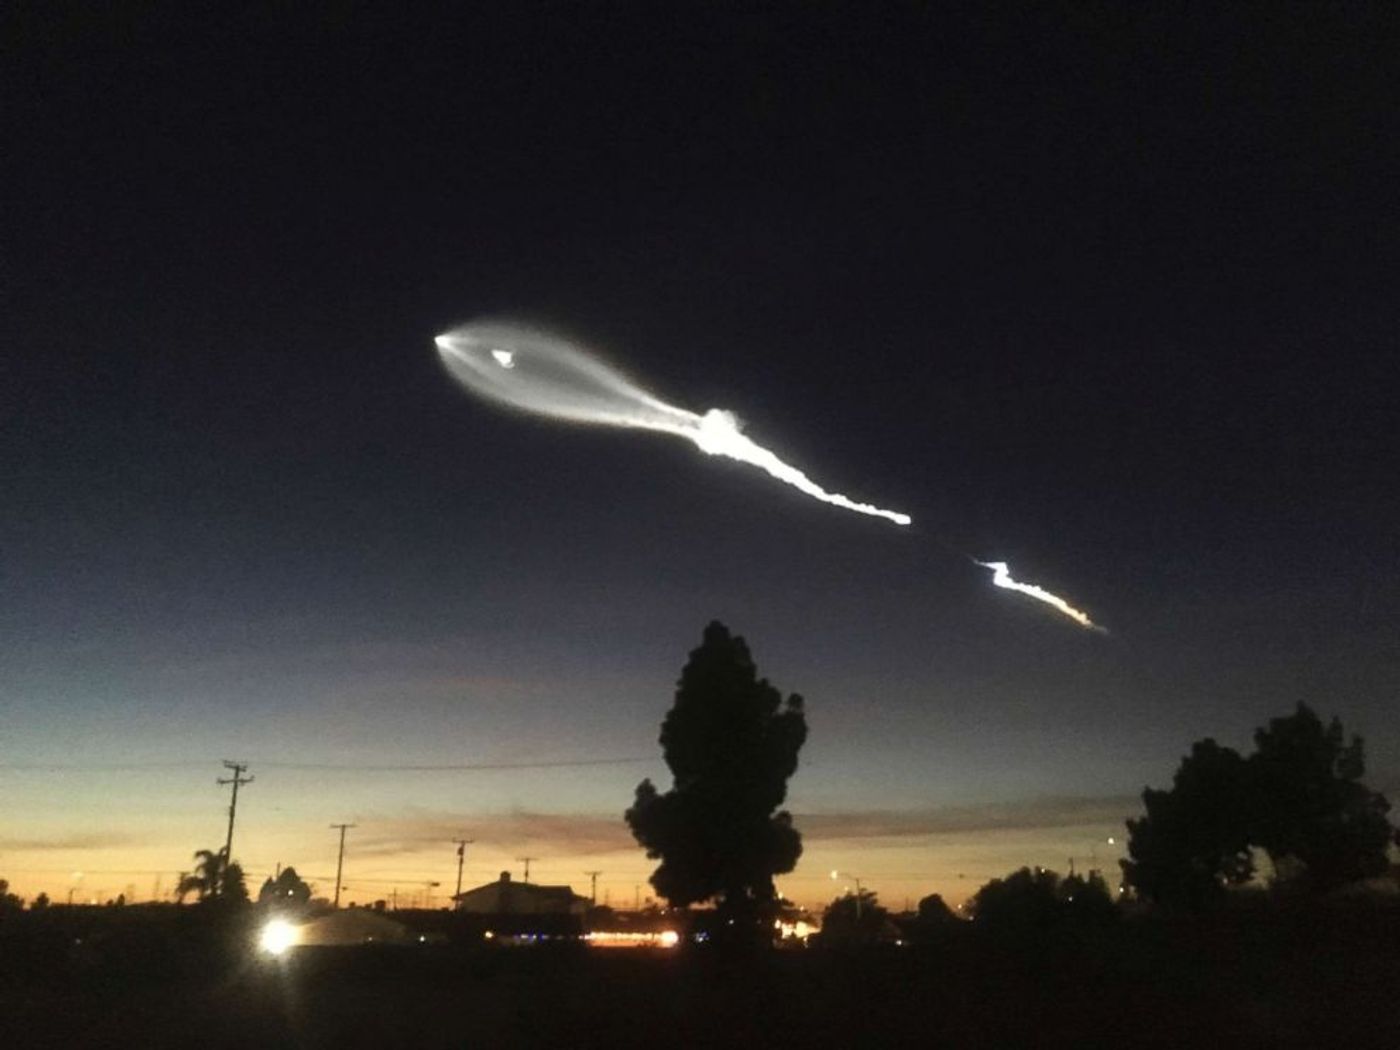 The SpaceX Falcon 9 launch on December 22nd left behind an unusually-bright display in its path.